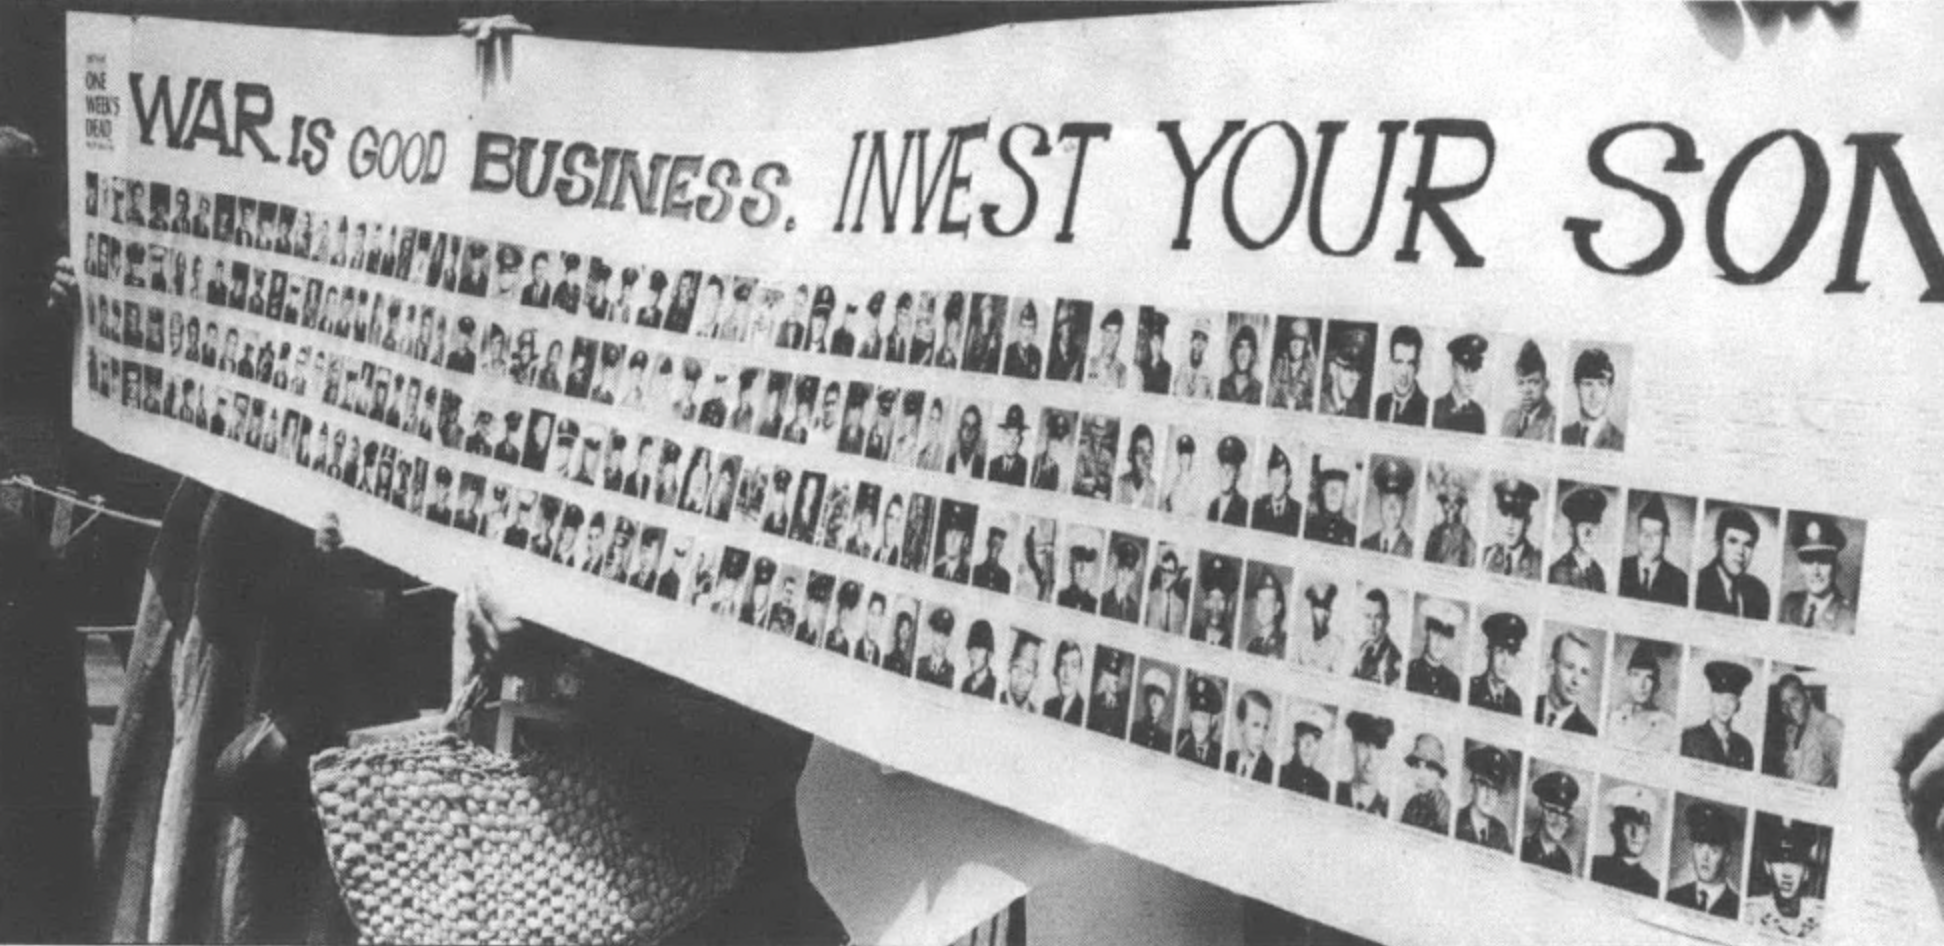 Banner reading "War is good business, invest your son" with multiple photos of enlisted men underneath